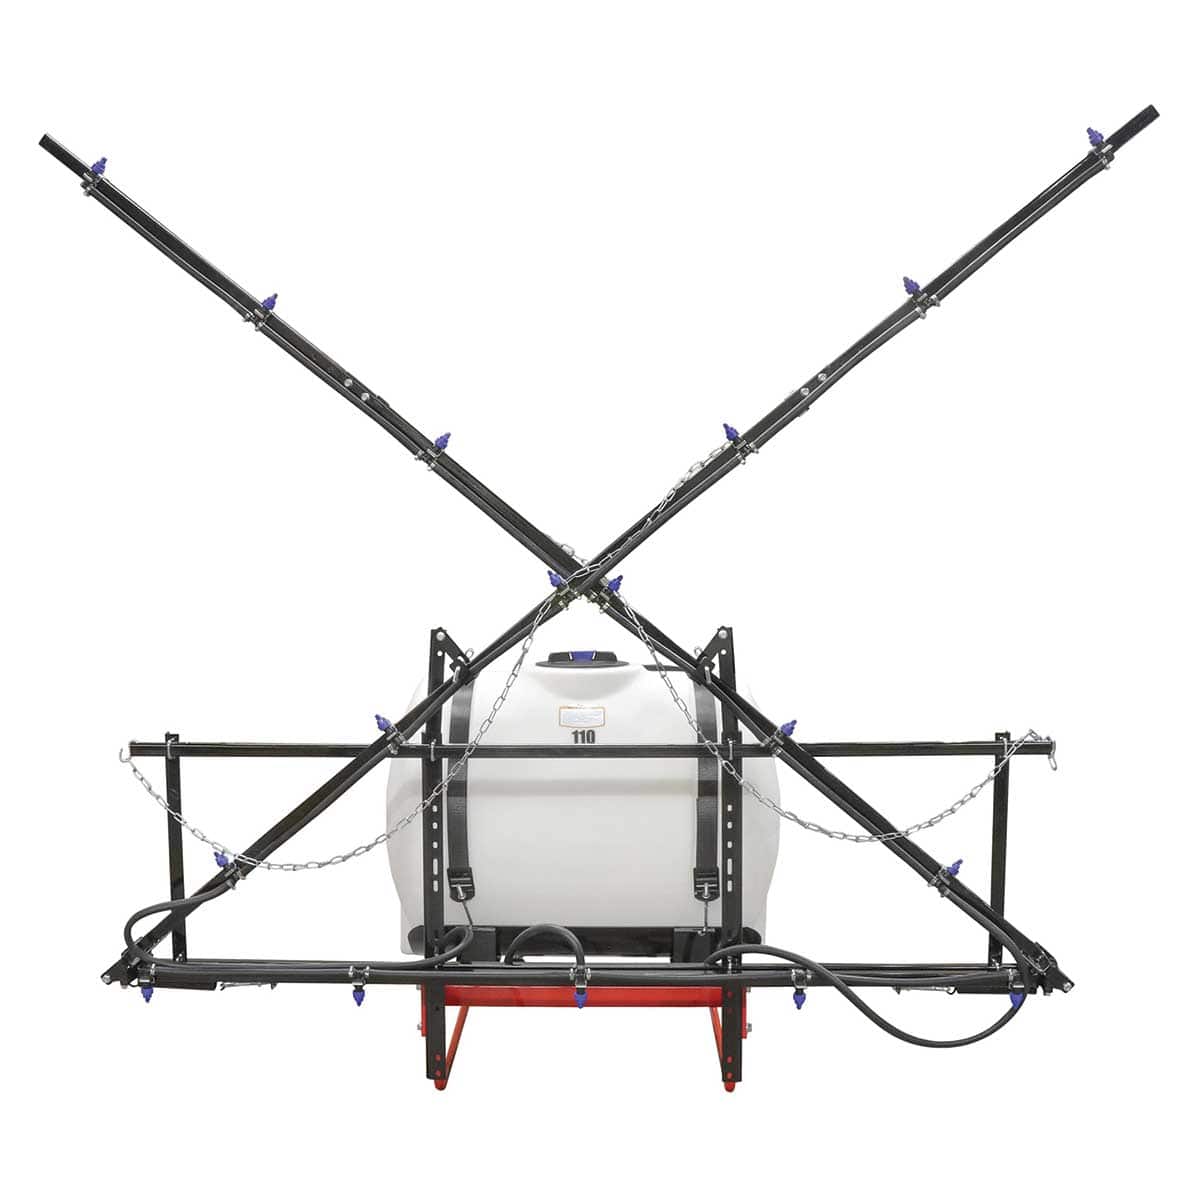 Fimco 110 Gallon 3-Point Hitch Sprayer with 28' Boom